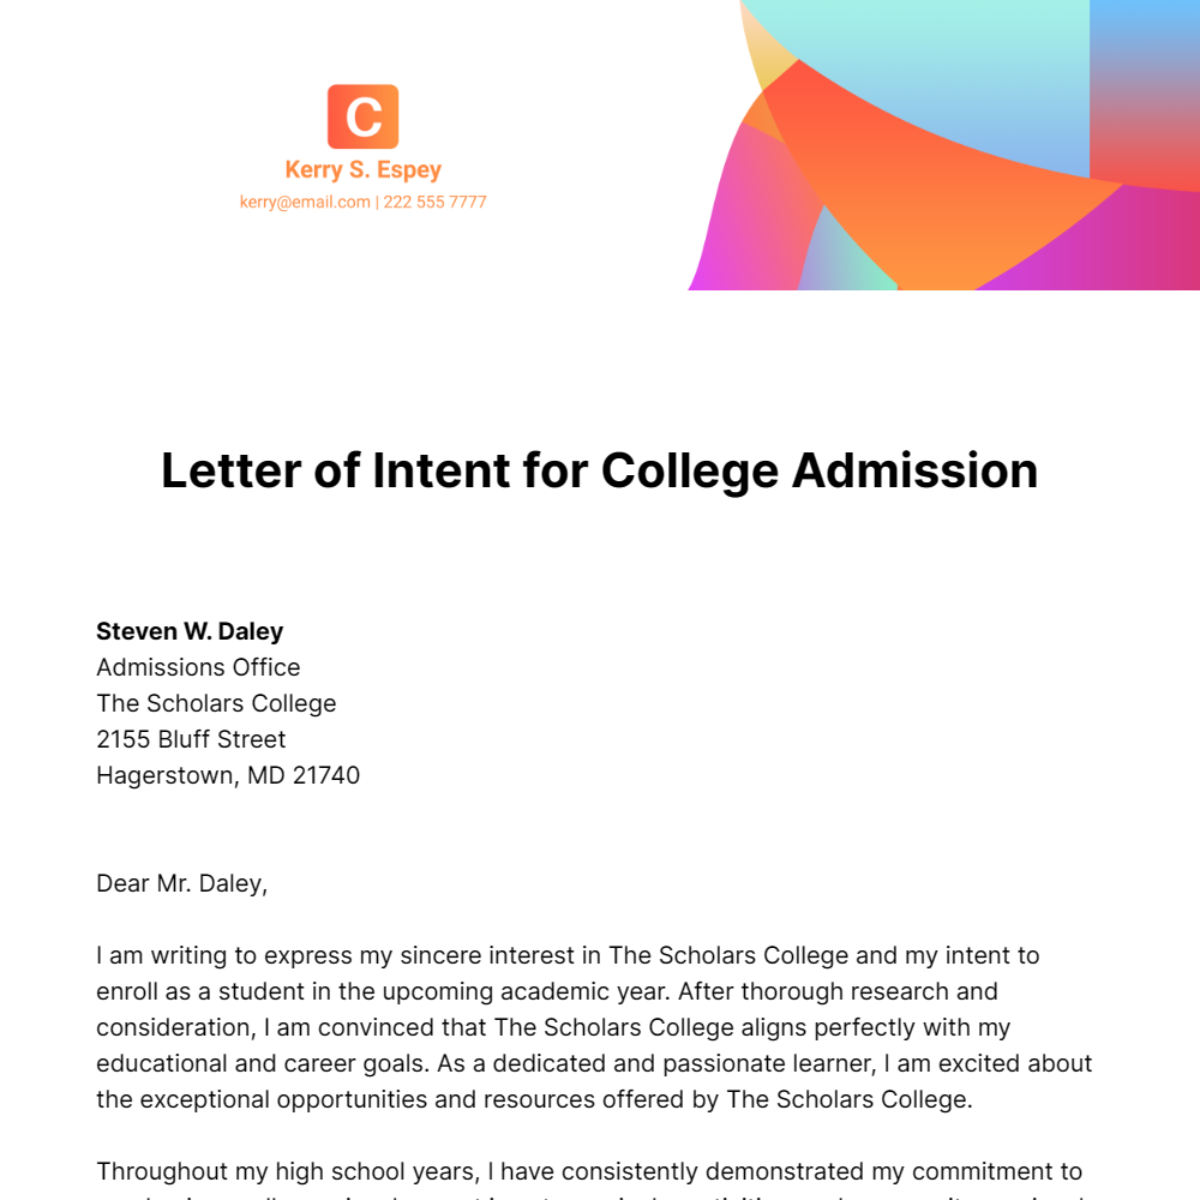 Free Letter of Intent for College Admission Template